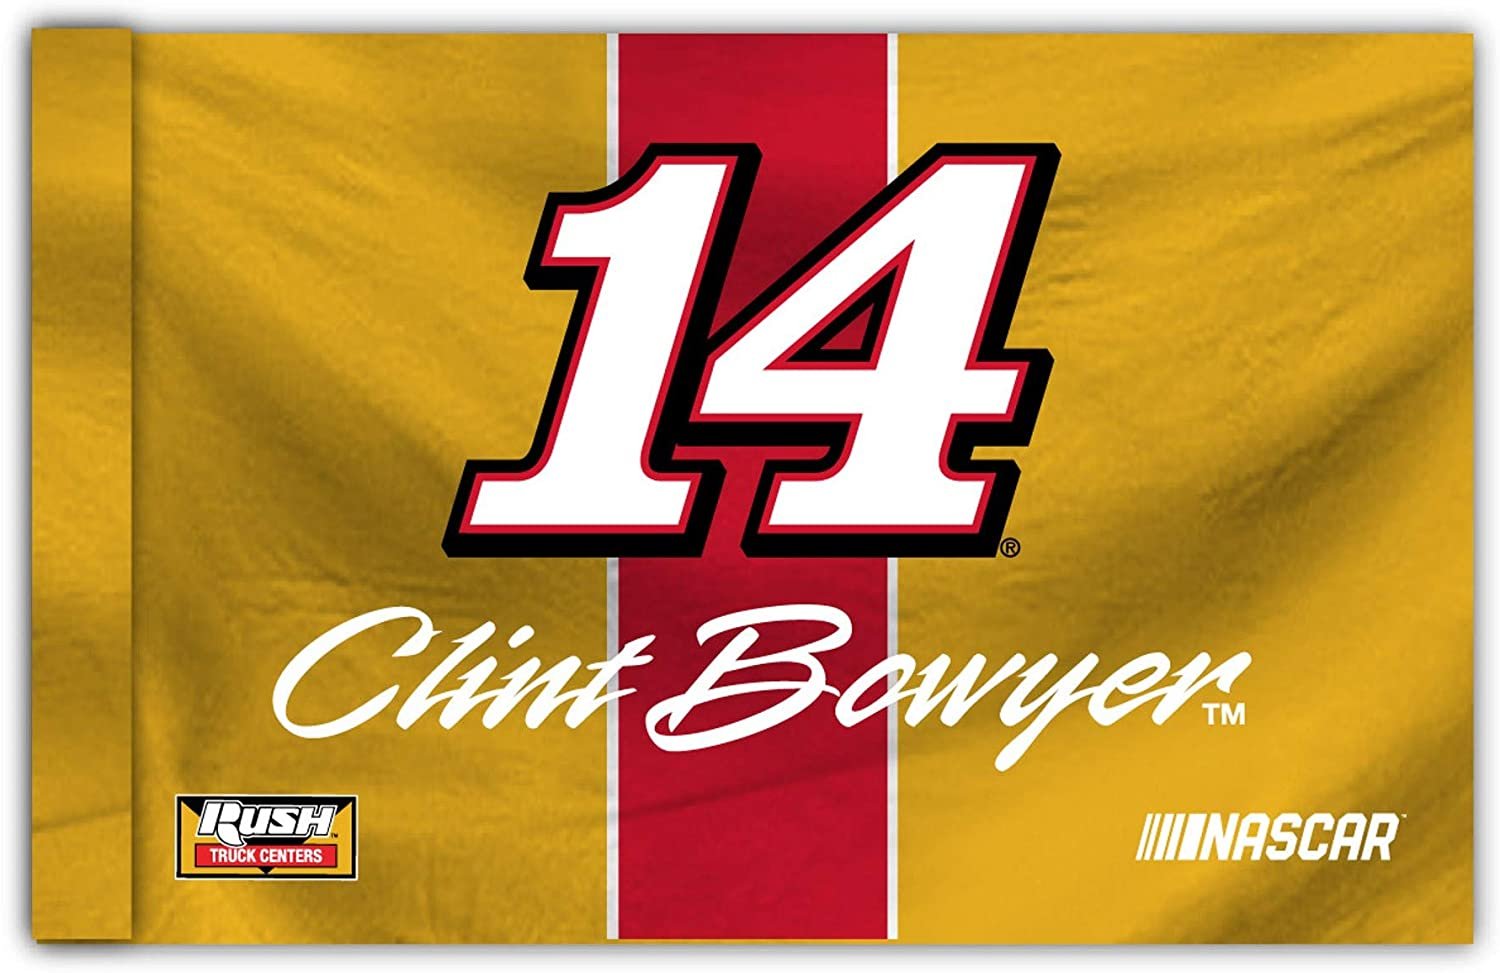 Clint Bowyer #14 Premium 3x5 Flag w/Grommets Outdoor House Banner Nascar Racing